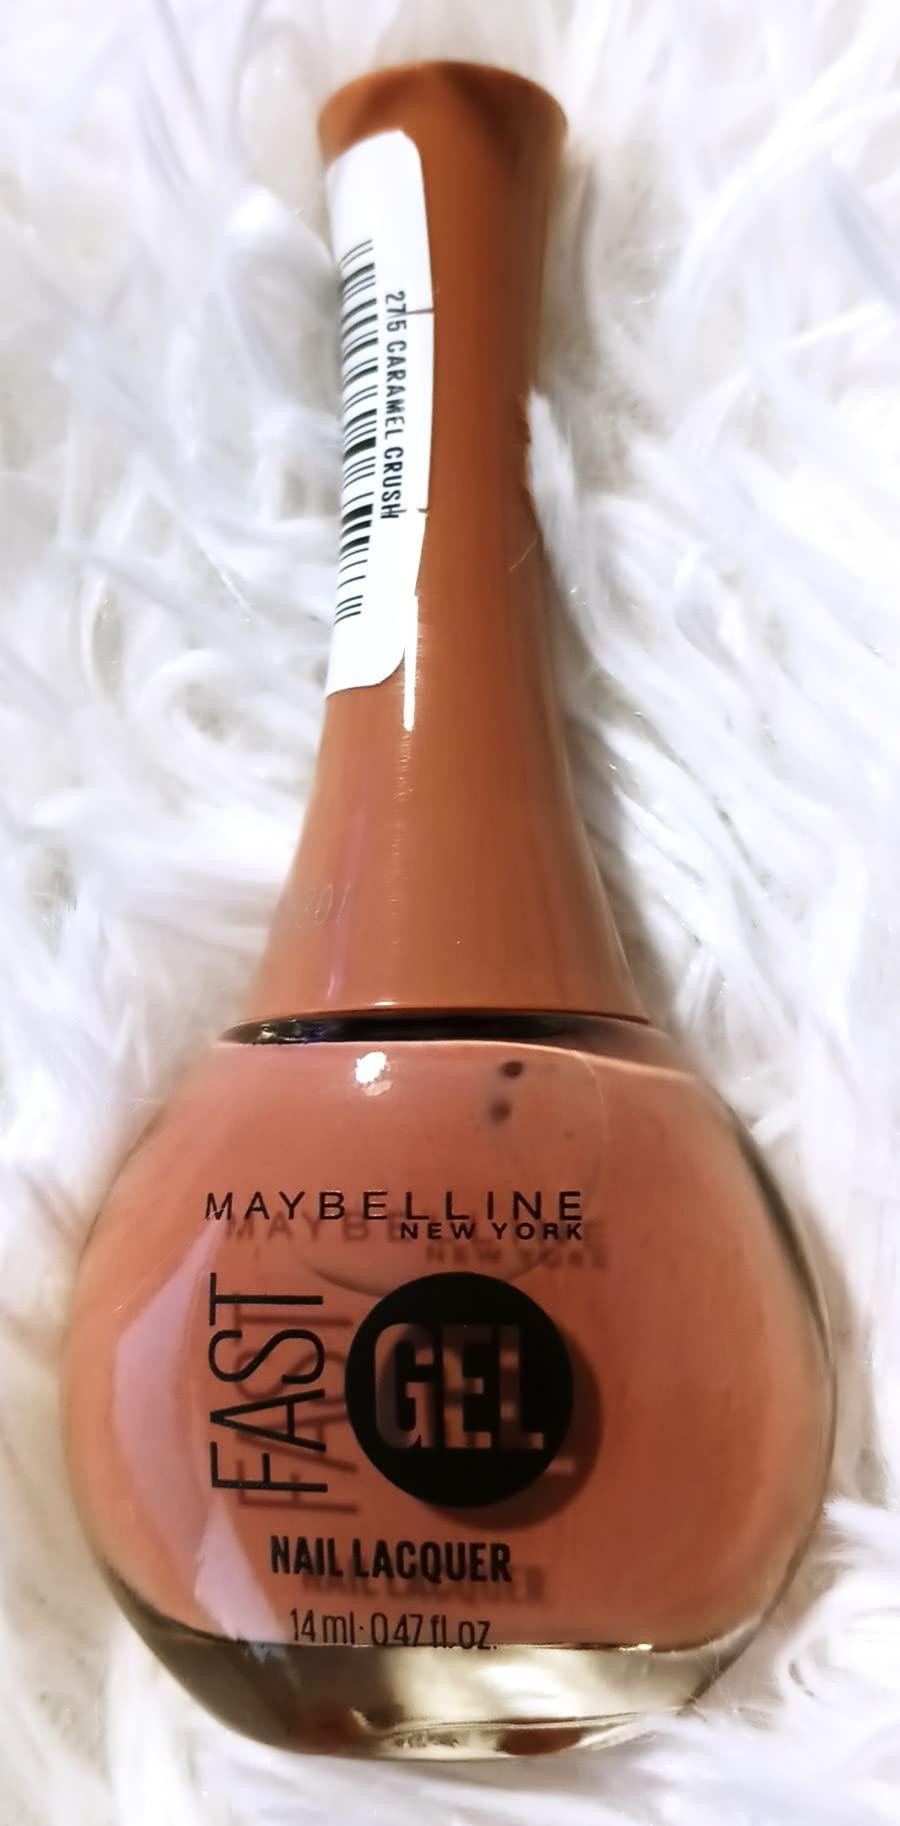 Maybelline New York Fast Gel Nail Lacquer in Caramel Crush